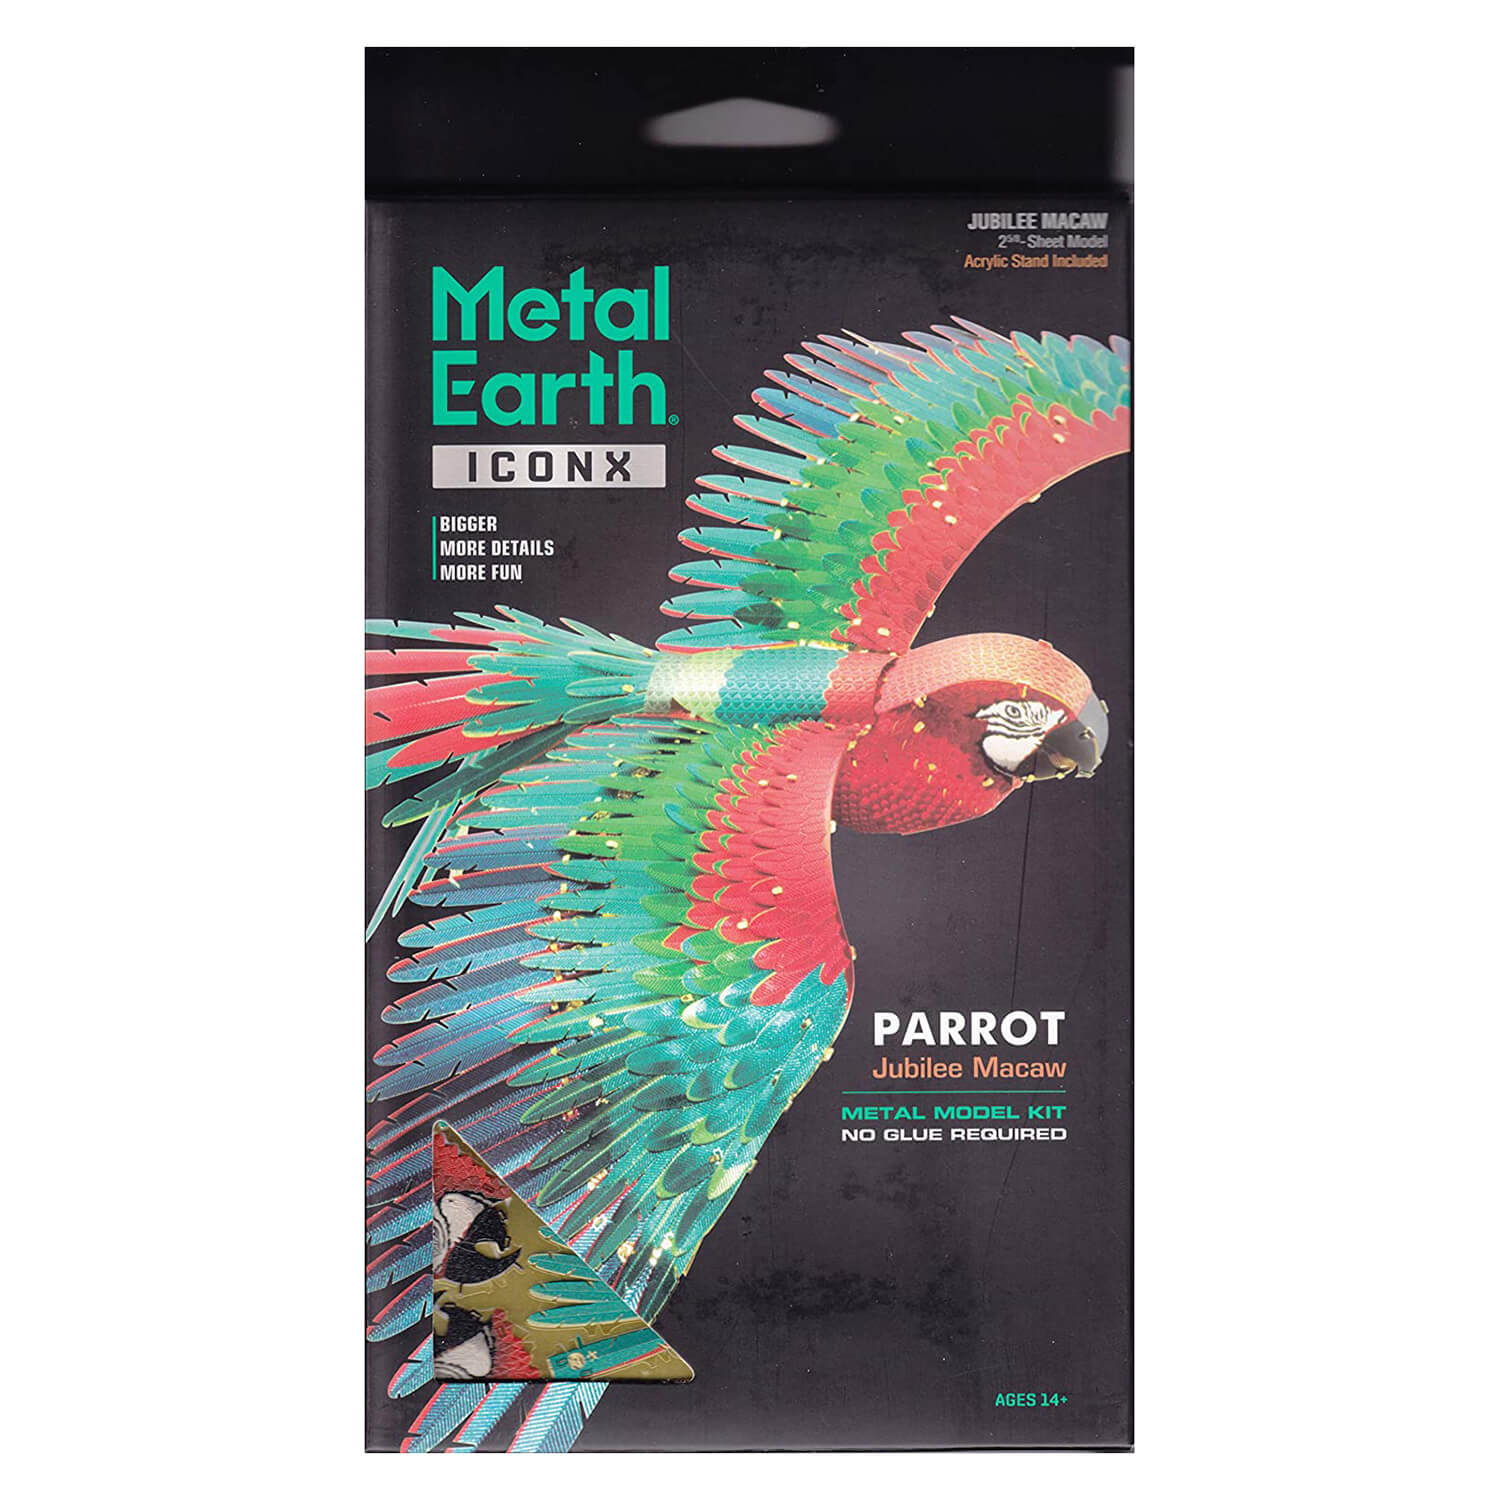 Front view of the Metal Earth Premium Iconx Parrot Metal Model Kit - 3.63 Sheets packaging.